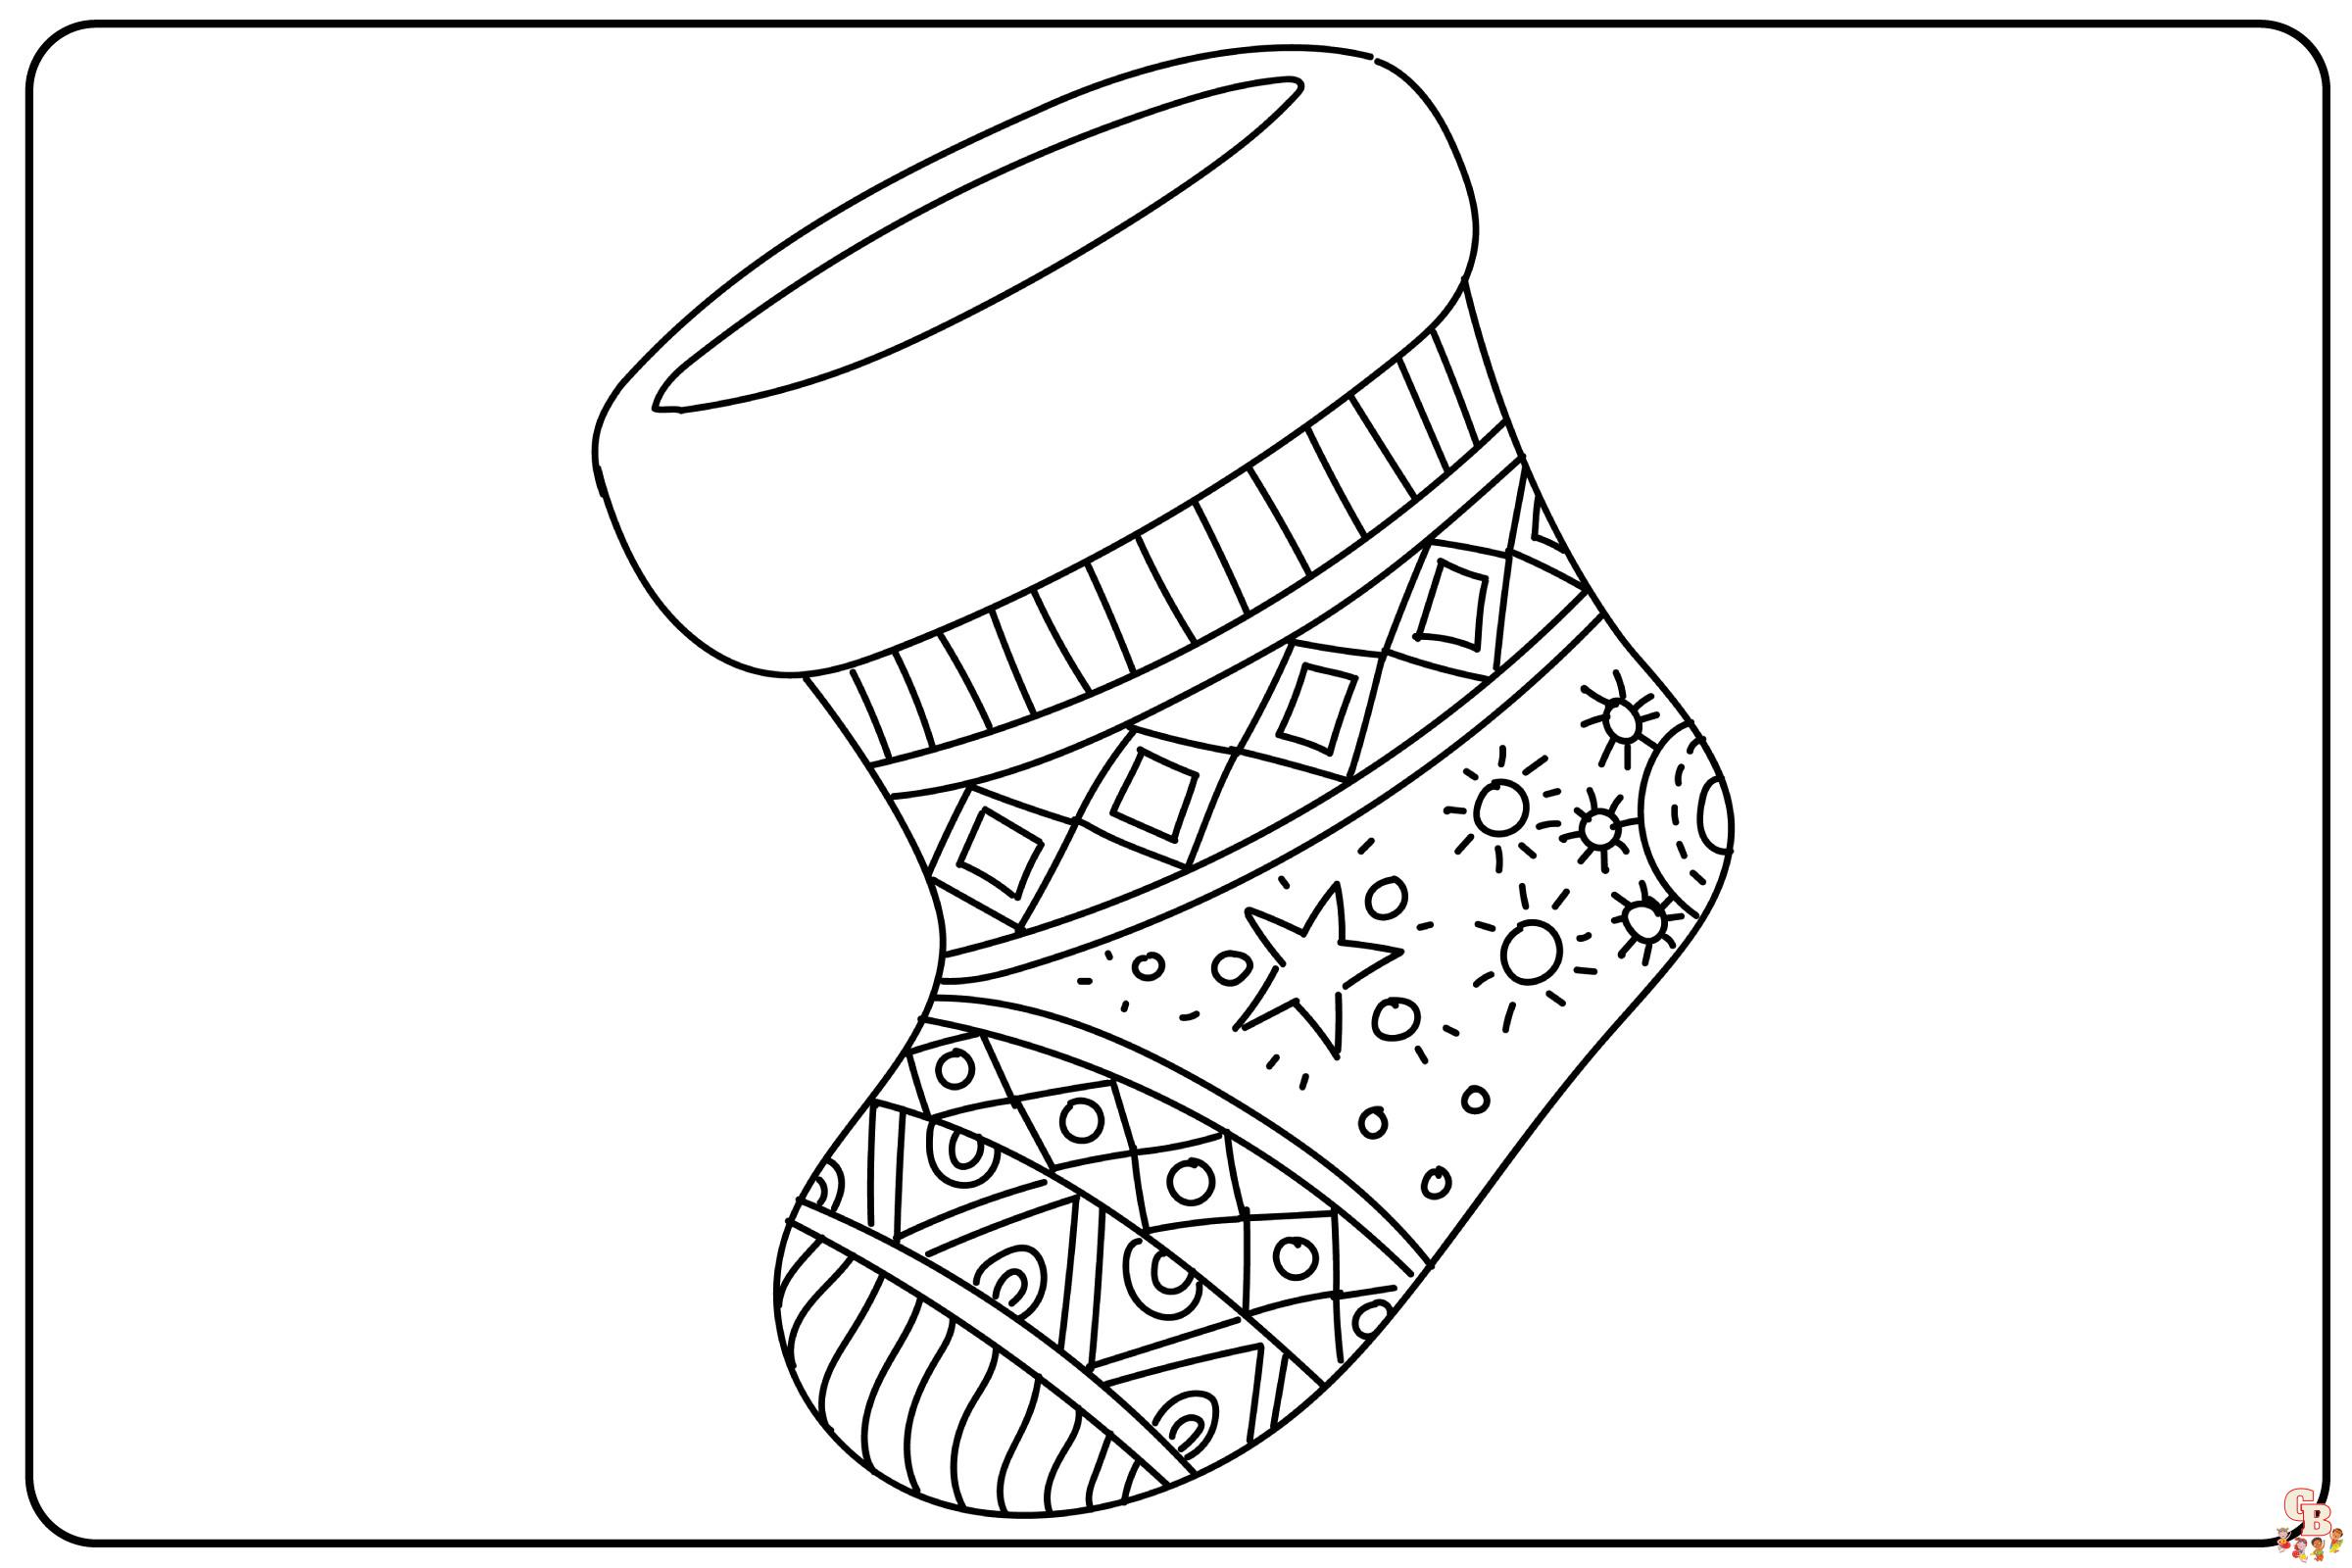 Stocking Coloring Pages